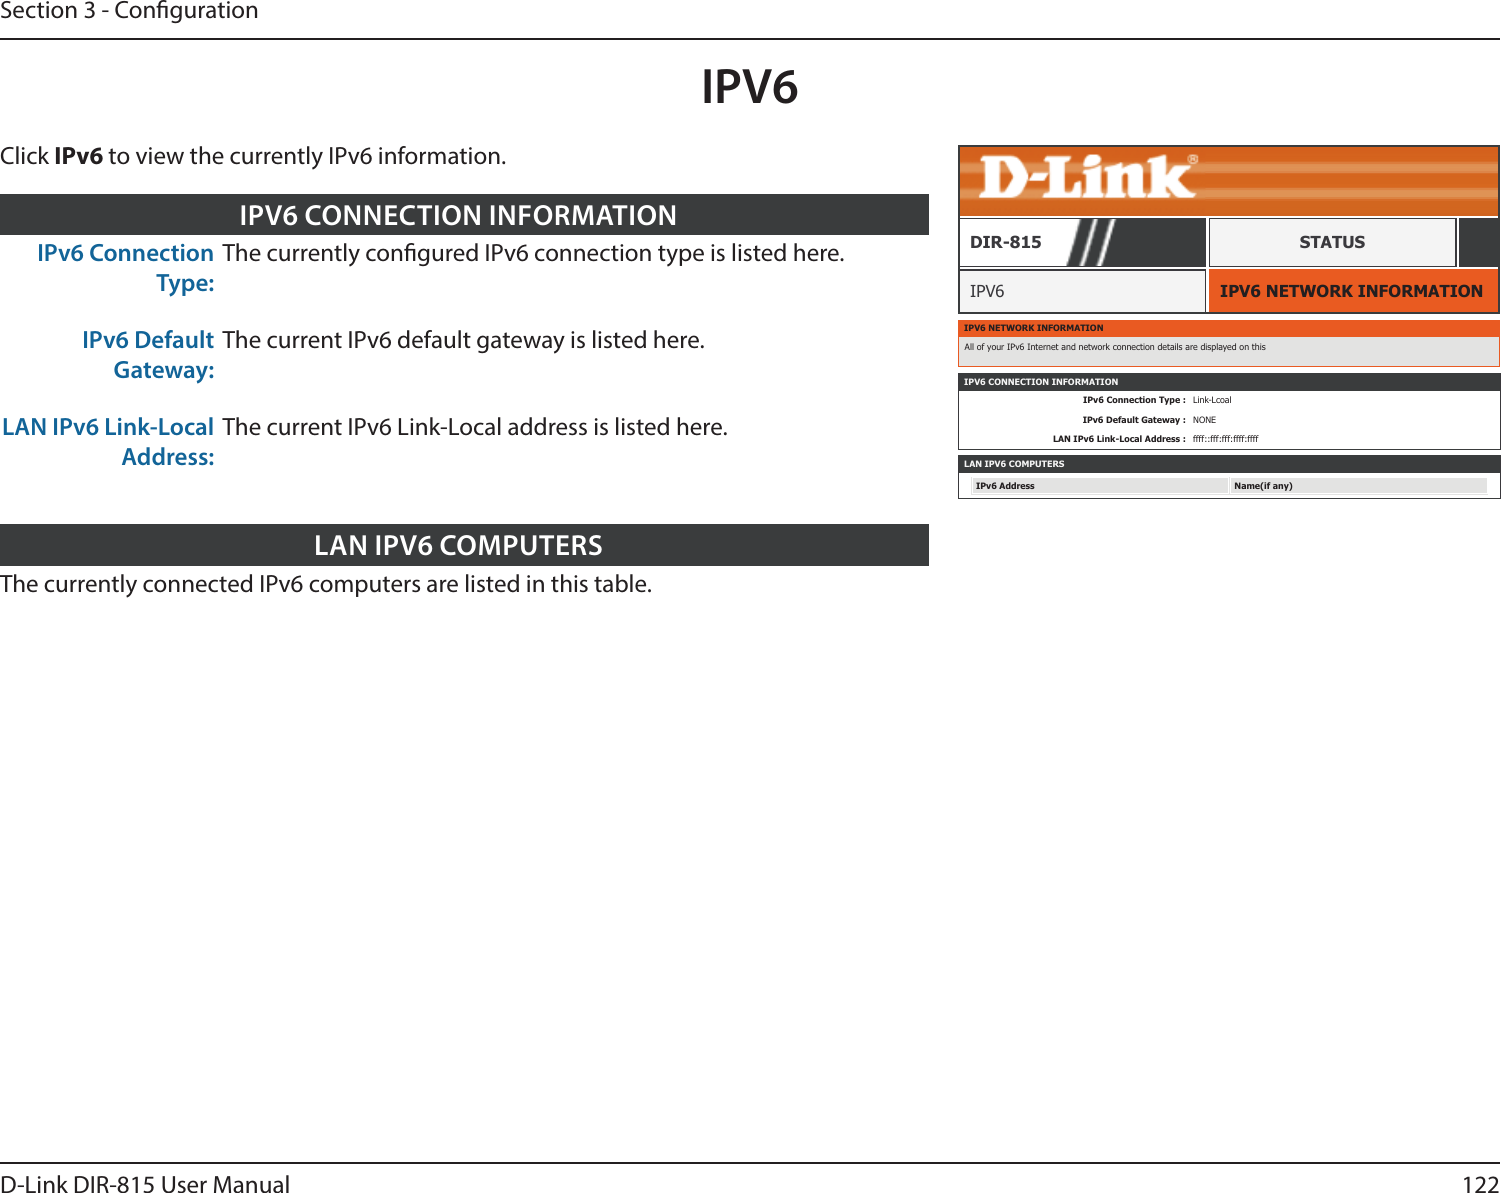 122D-Link DIR-815 User ManualSection 3 - CongurationIPV6IPV6 NETWORK INFORMATIONIPV6DIR-815 STATUSIPv6 Connection Type:The currently congured IPv6 connection type is listed here.IPv6 Default Gateway:The current IPv6 default gateway is listed here.LAN IPv6 Link-Local Address:The current IPv6 Link-Local address is listed here.IPV6 CONNECTION INFORMATIONThe currently connected IPv6 computers are listed in this table.LAN IPV6 COMPUTERSIPV6 NETWORK INFORMATIONAll of your IPv6 Internet and network connection details are displayed on thisIPV6 CONNECTION INFORMATIONIPv6 Connection Type : Link-LcoalIPv6 Default Gateway : NONELAN IPv6 Link-Local Address : ffff::fff:fff:ffff:ffffLAN IPV6 COMPUTERSIPv6 Address Name(if any)Click IPv6 to view the currently IPv6 information.